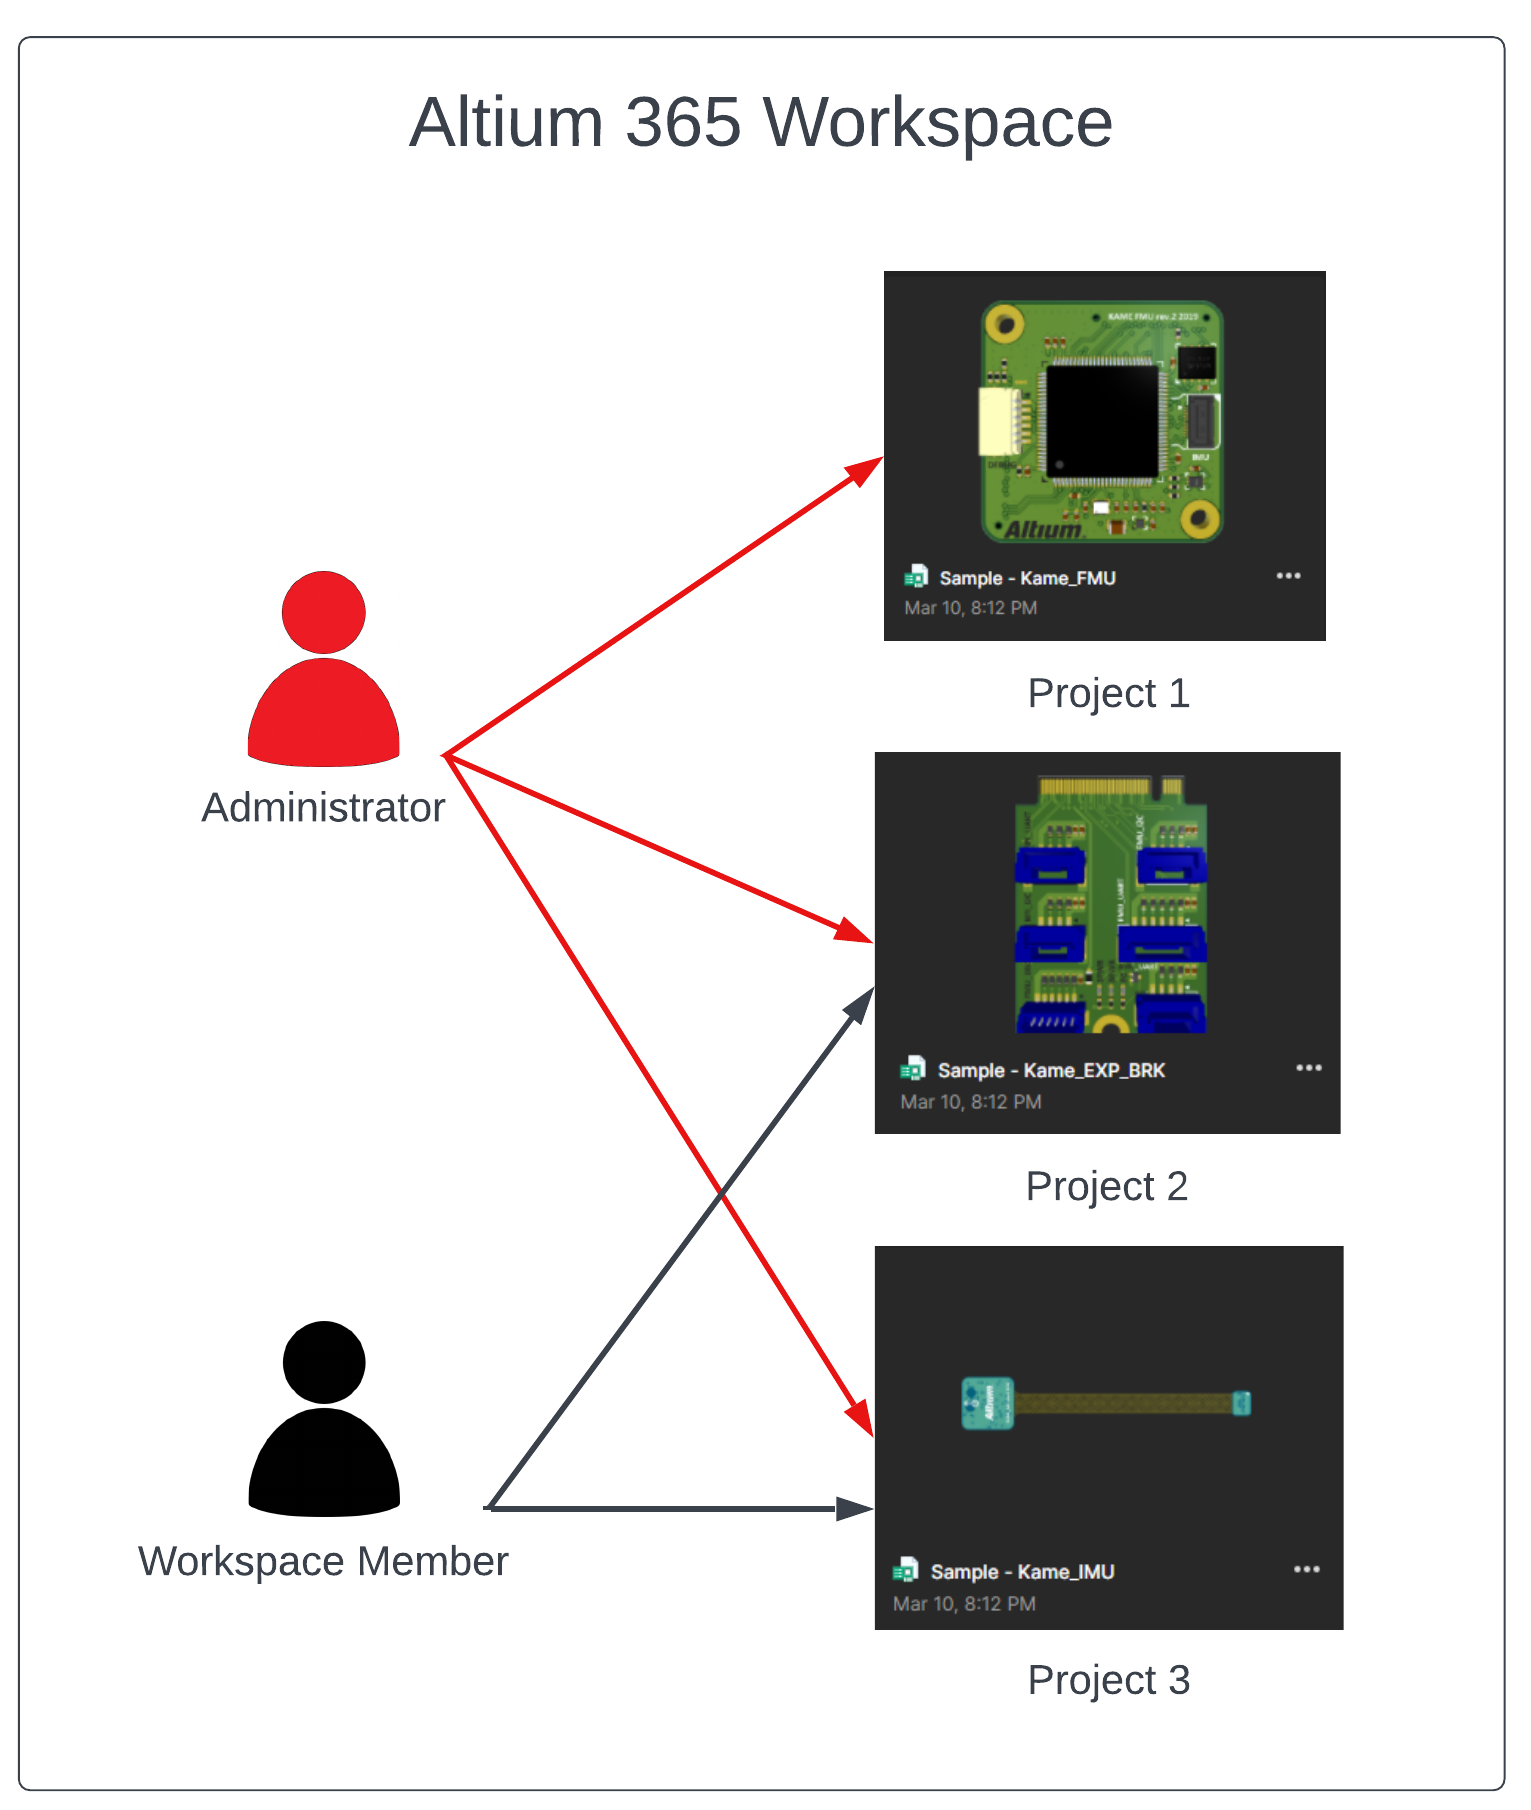 Fig. 1 - Altium 365 Workspace administrator and members